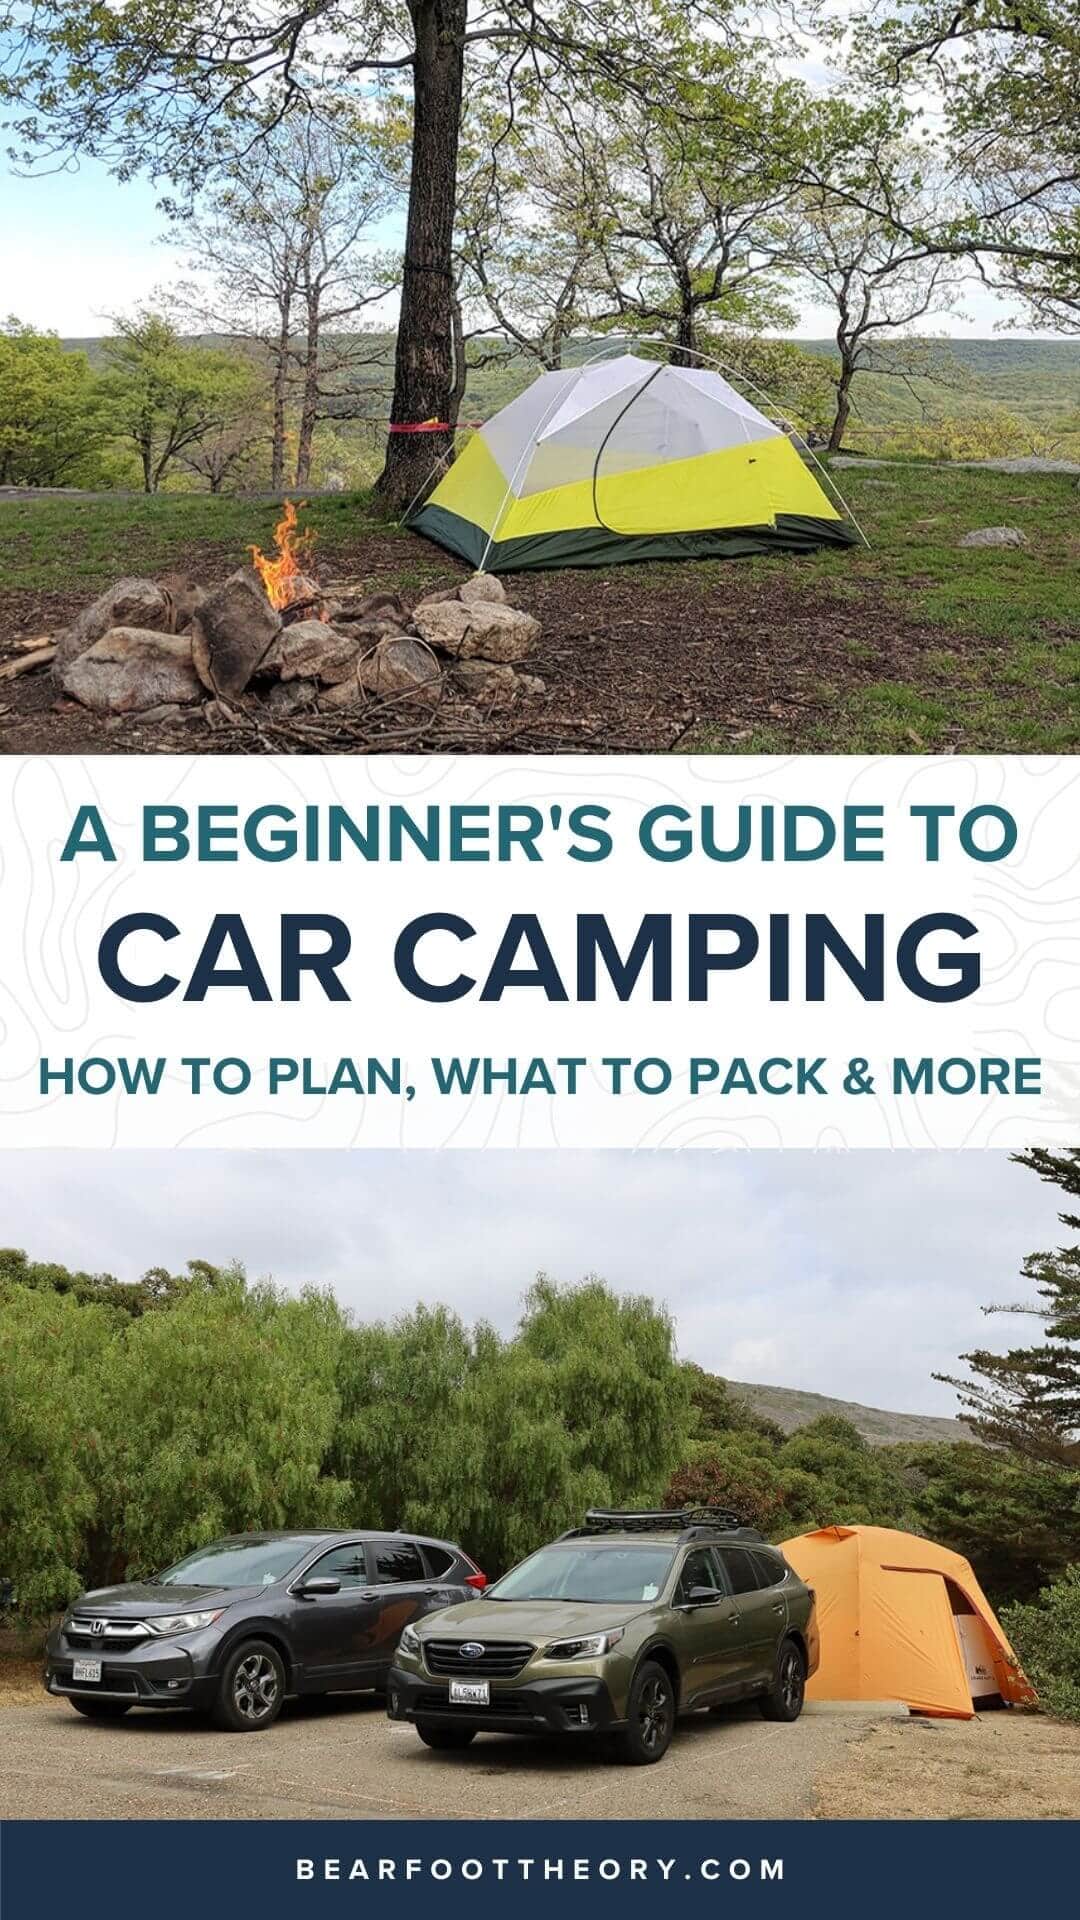 Plan an epic car camping trip with this complete beginner guide including tips for finding campsites, gear, cooking, what to pack, and more.